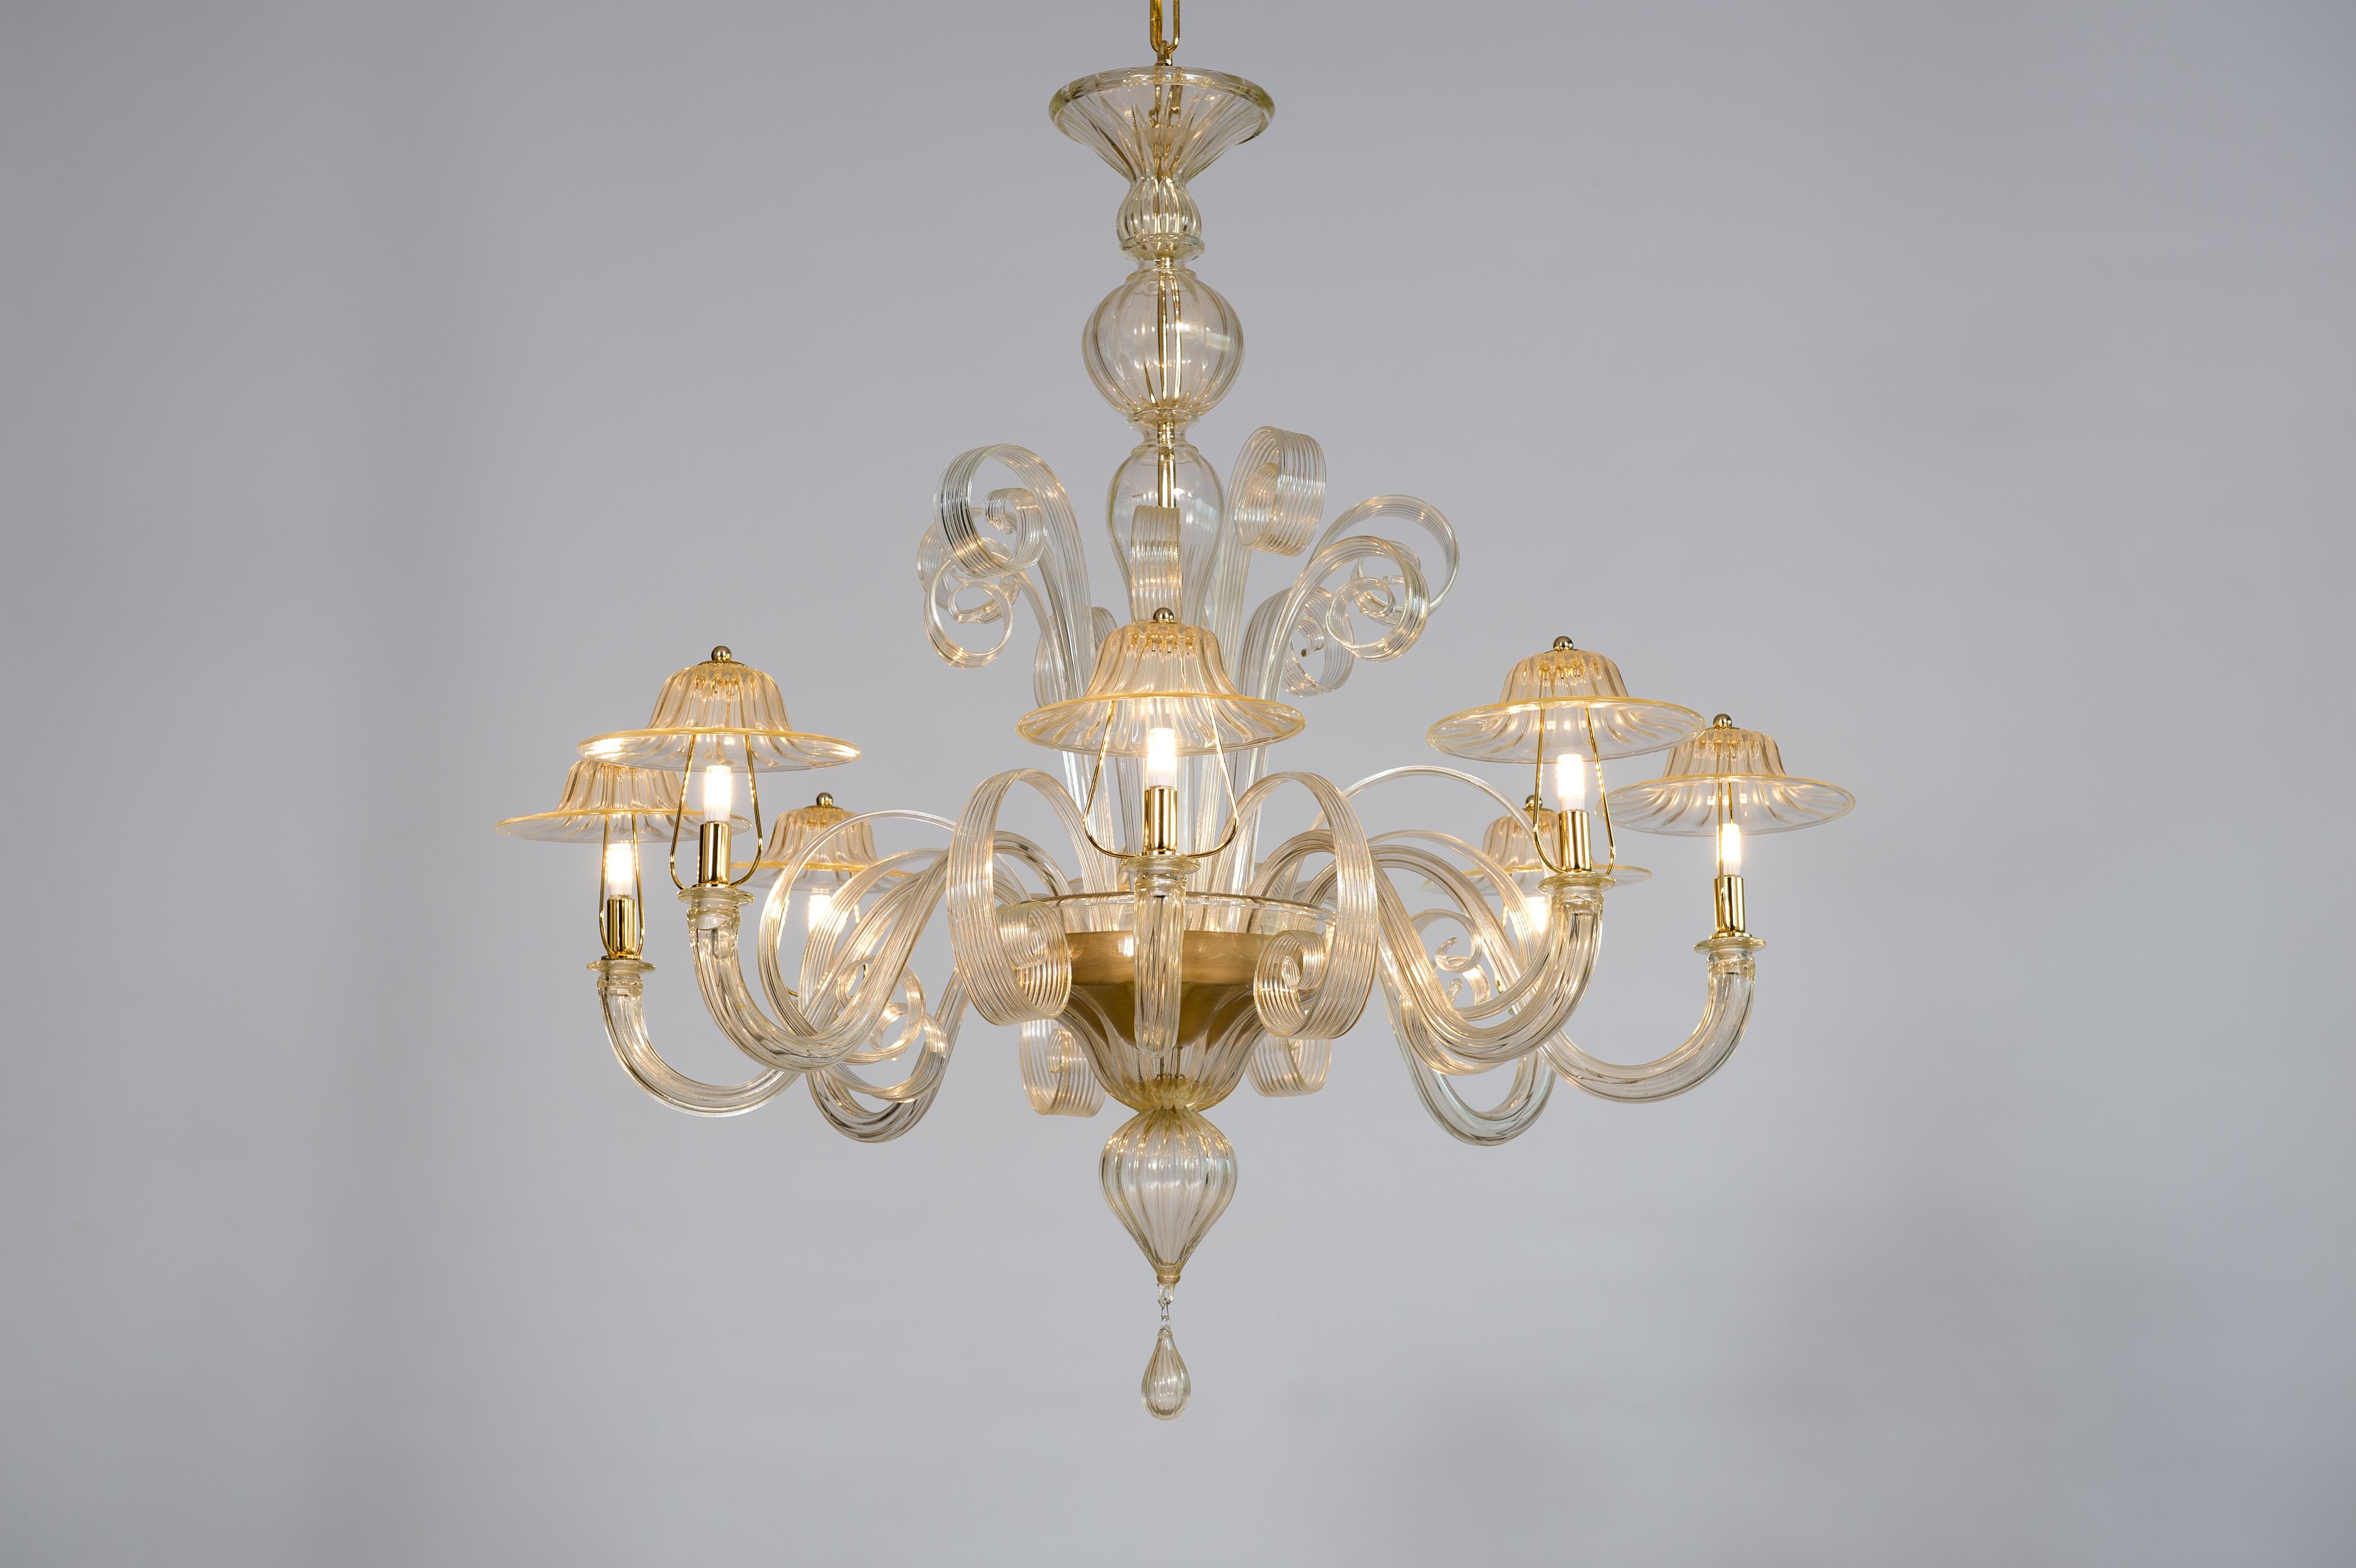 Murano Glass Chandelier with 24-Karat Gold and Pastoral Decorations, Italy For Sale 6